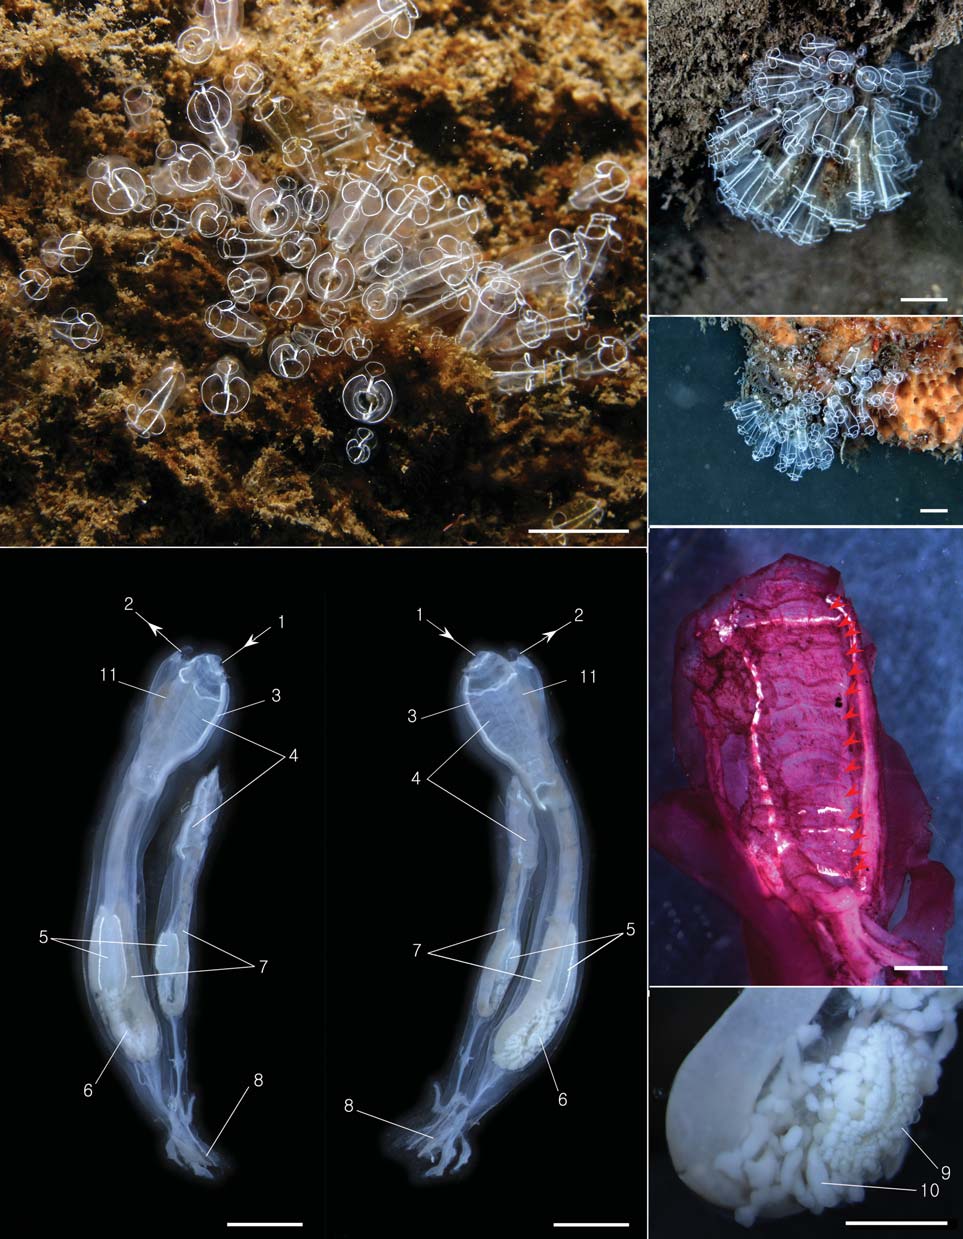 Clavelina lepadiformis. A-C Colony in life; D Left side of two zooids; E Right side of two zooids; F Stigmata in dyed branchial sac (arrowheads); G Gonads. 1 oral siphon; 2 atrial siphon; 3 endostyle; 4 branchial sac; 5 stomach; 6 gonads; 7 intestine; 8 stolon; 9 ovary; 10 testis; 11 dorsal lamina. Scale bars: A-C=2 cm D E=3 mm F G=1 mm.